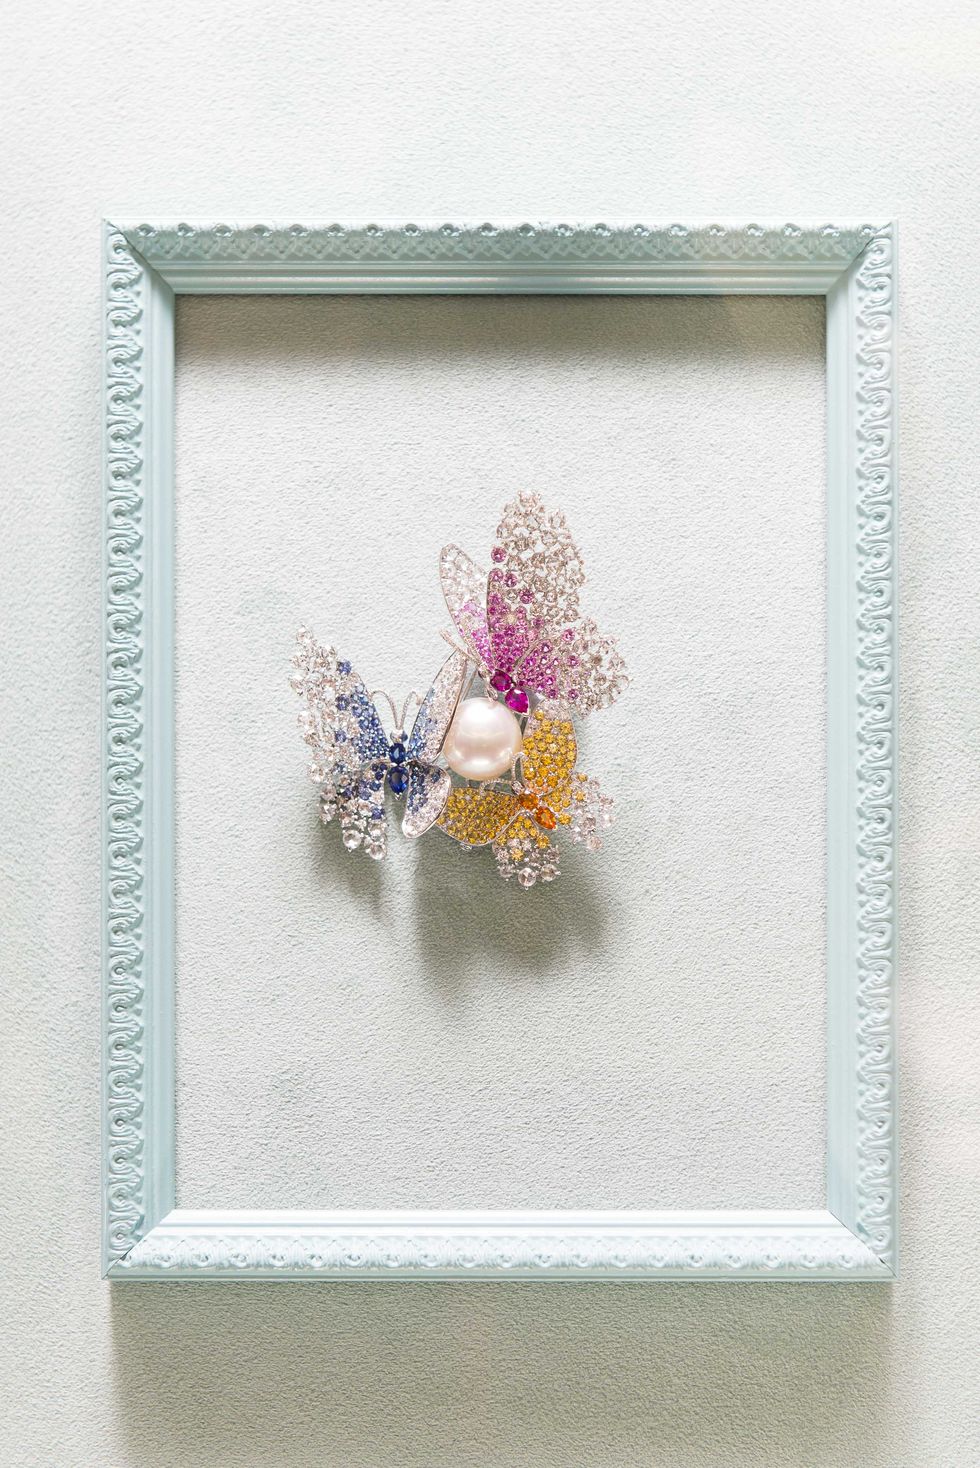 Wall, Picture frame, Rectangle, Visual arts, Fashion accessory, Bird nest, Still life photography, 